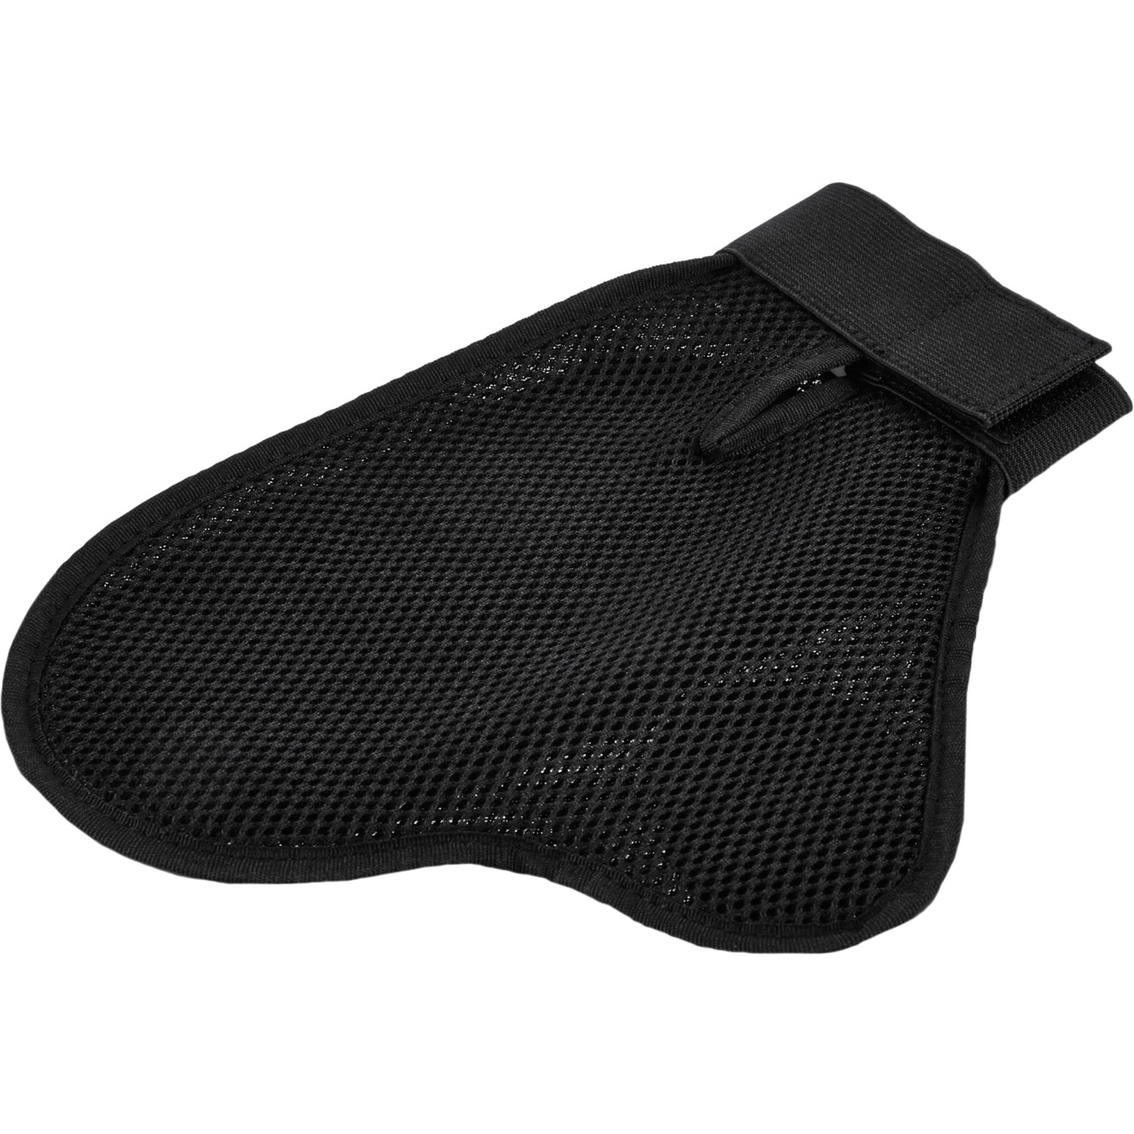 Well & Good 3 in 1 Dog Grooming Mitt, Black - Image 3 of 3